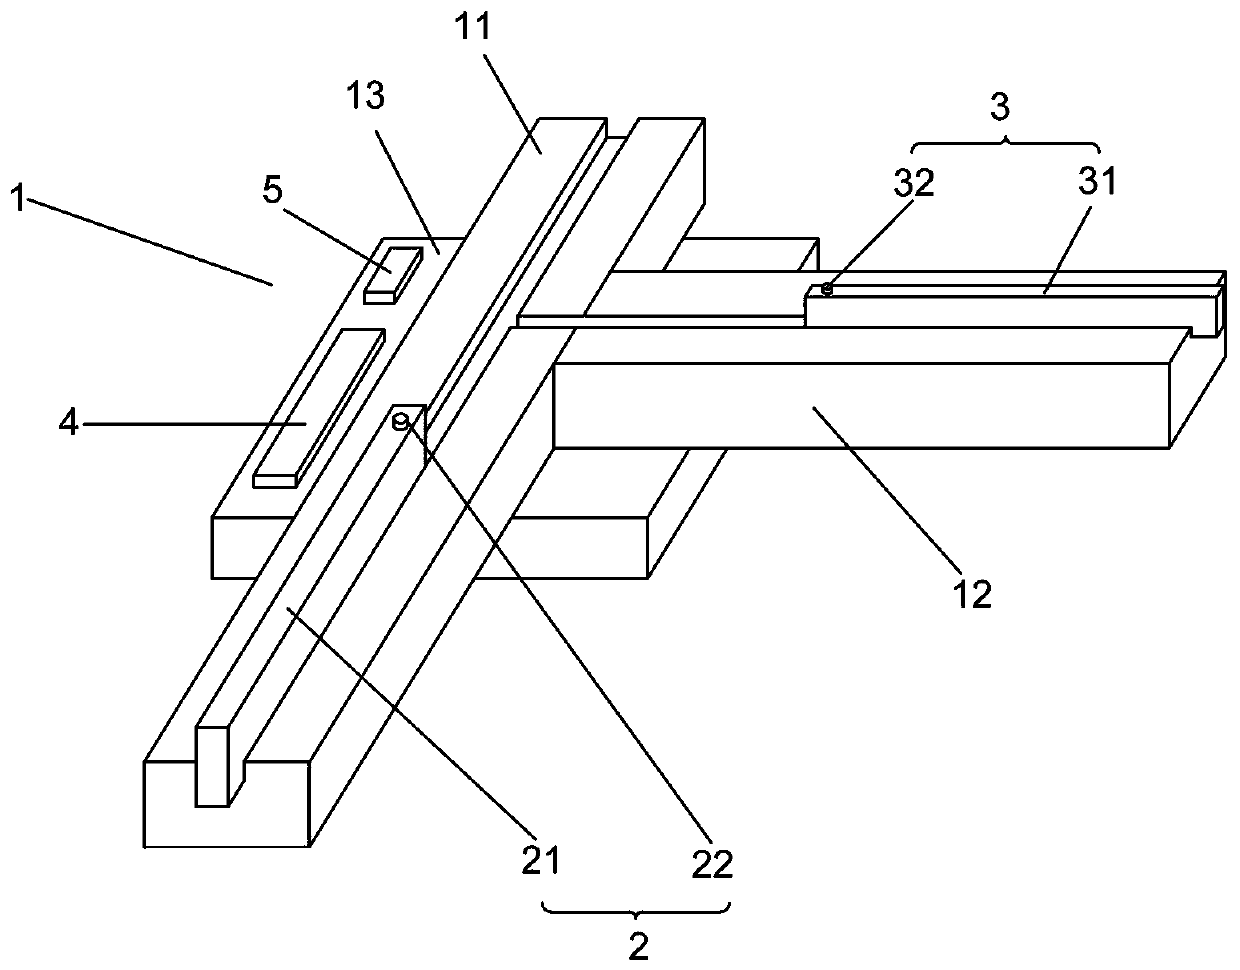 A visual recognition device and method suitable for placement machines